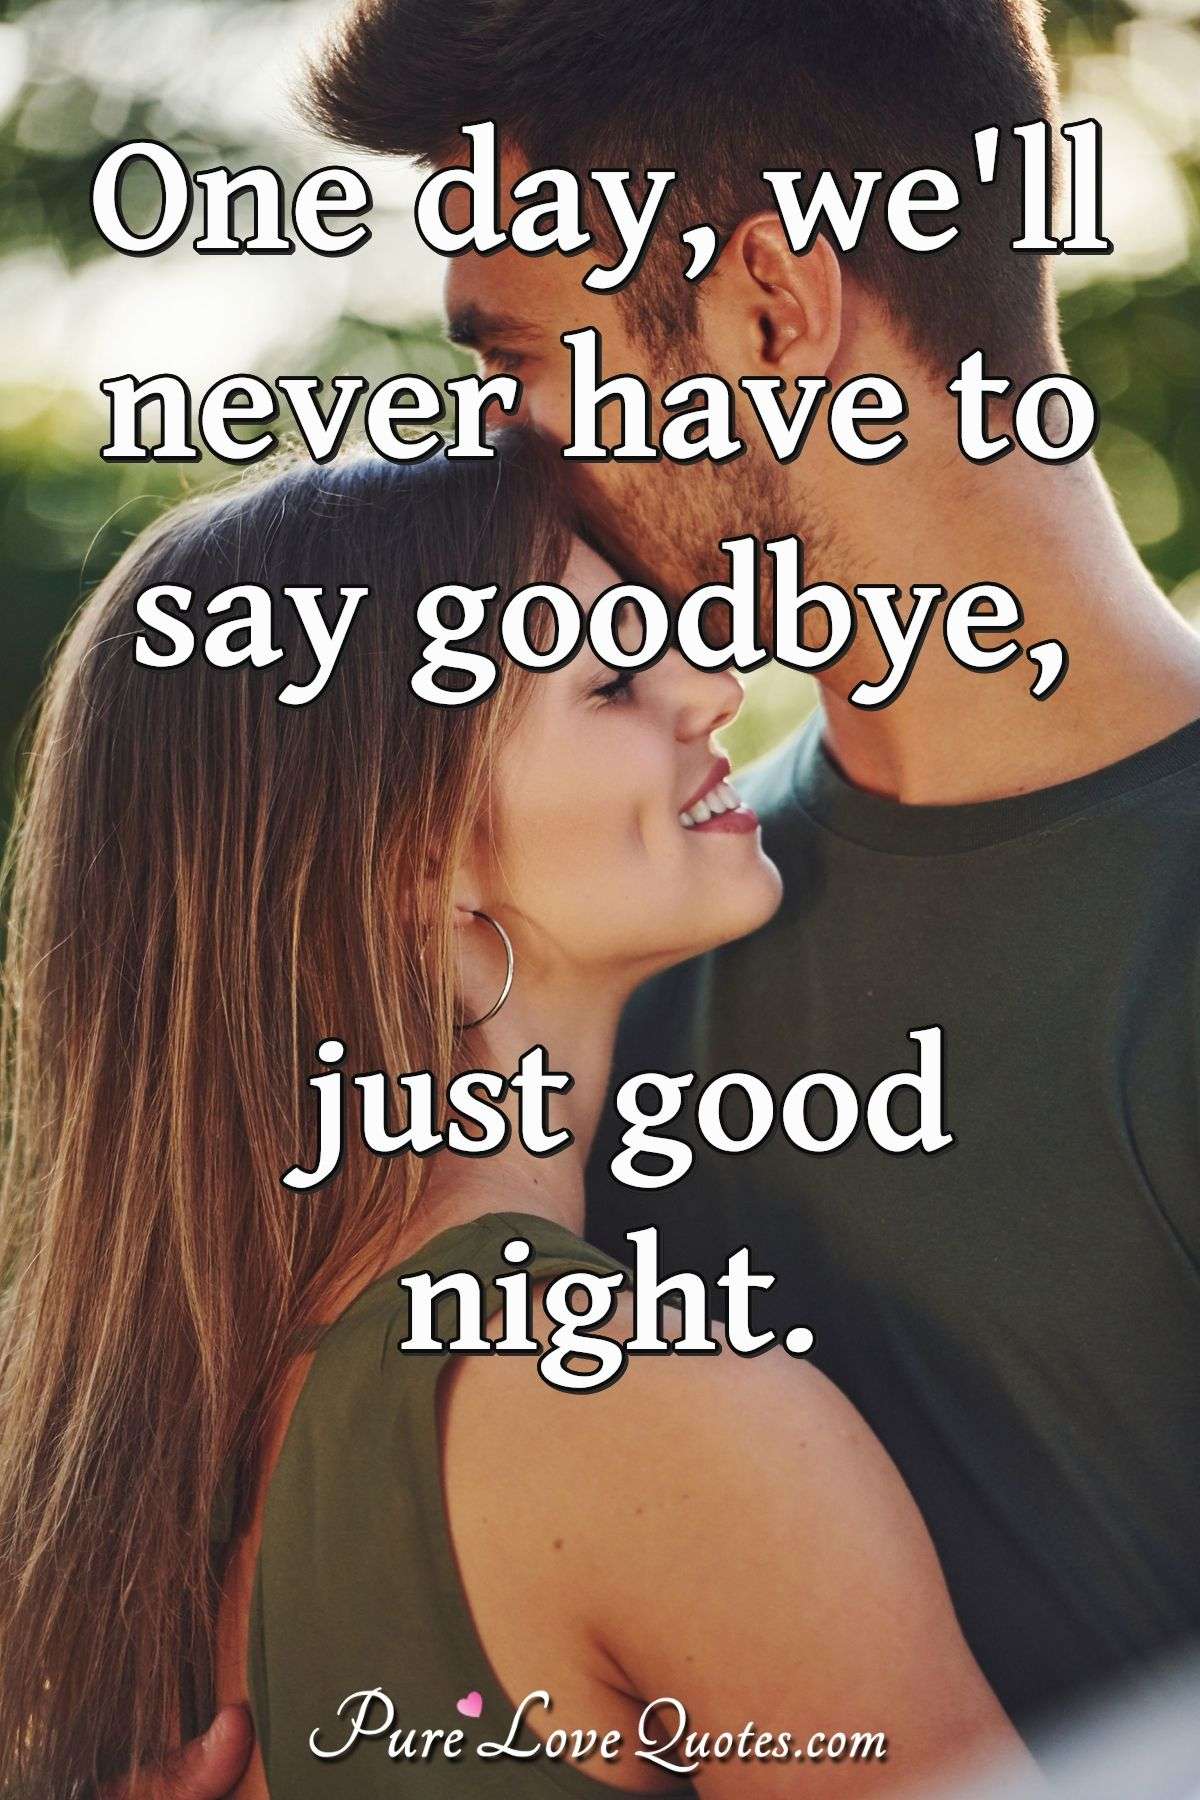 One day, we'll never have to say goodbye, just good night. - Anonymous